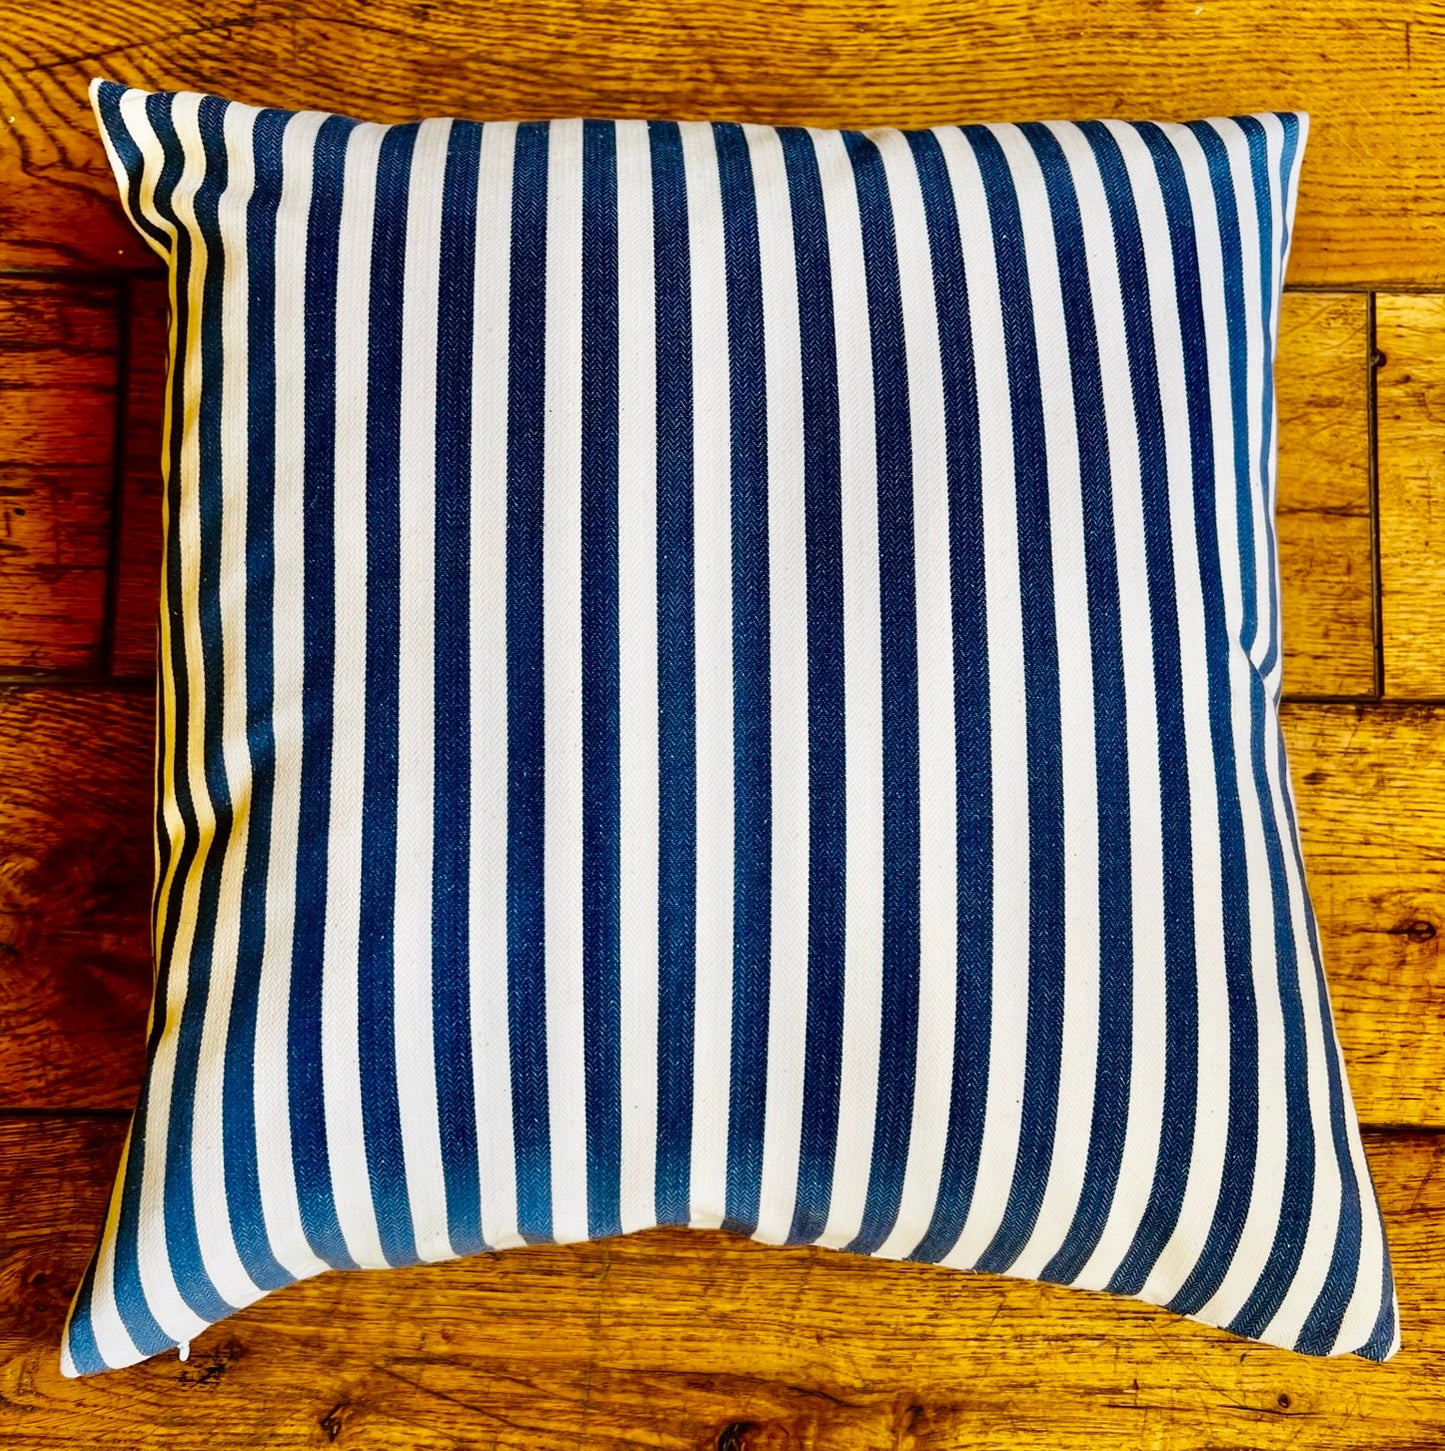 Cushion - Blue Candy Stripe - Size Small | New Romantic